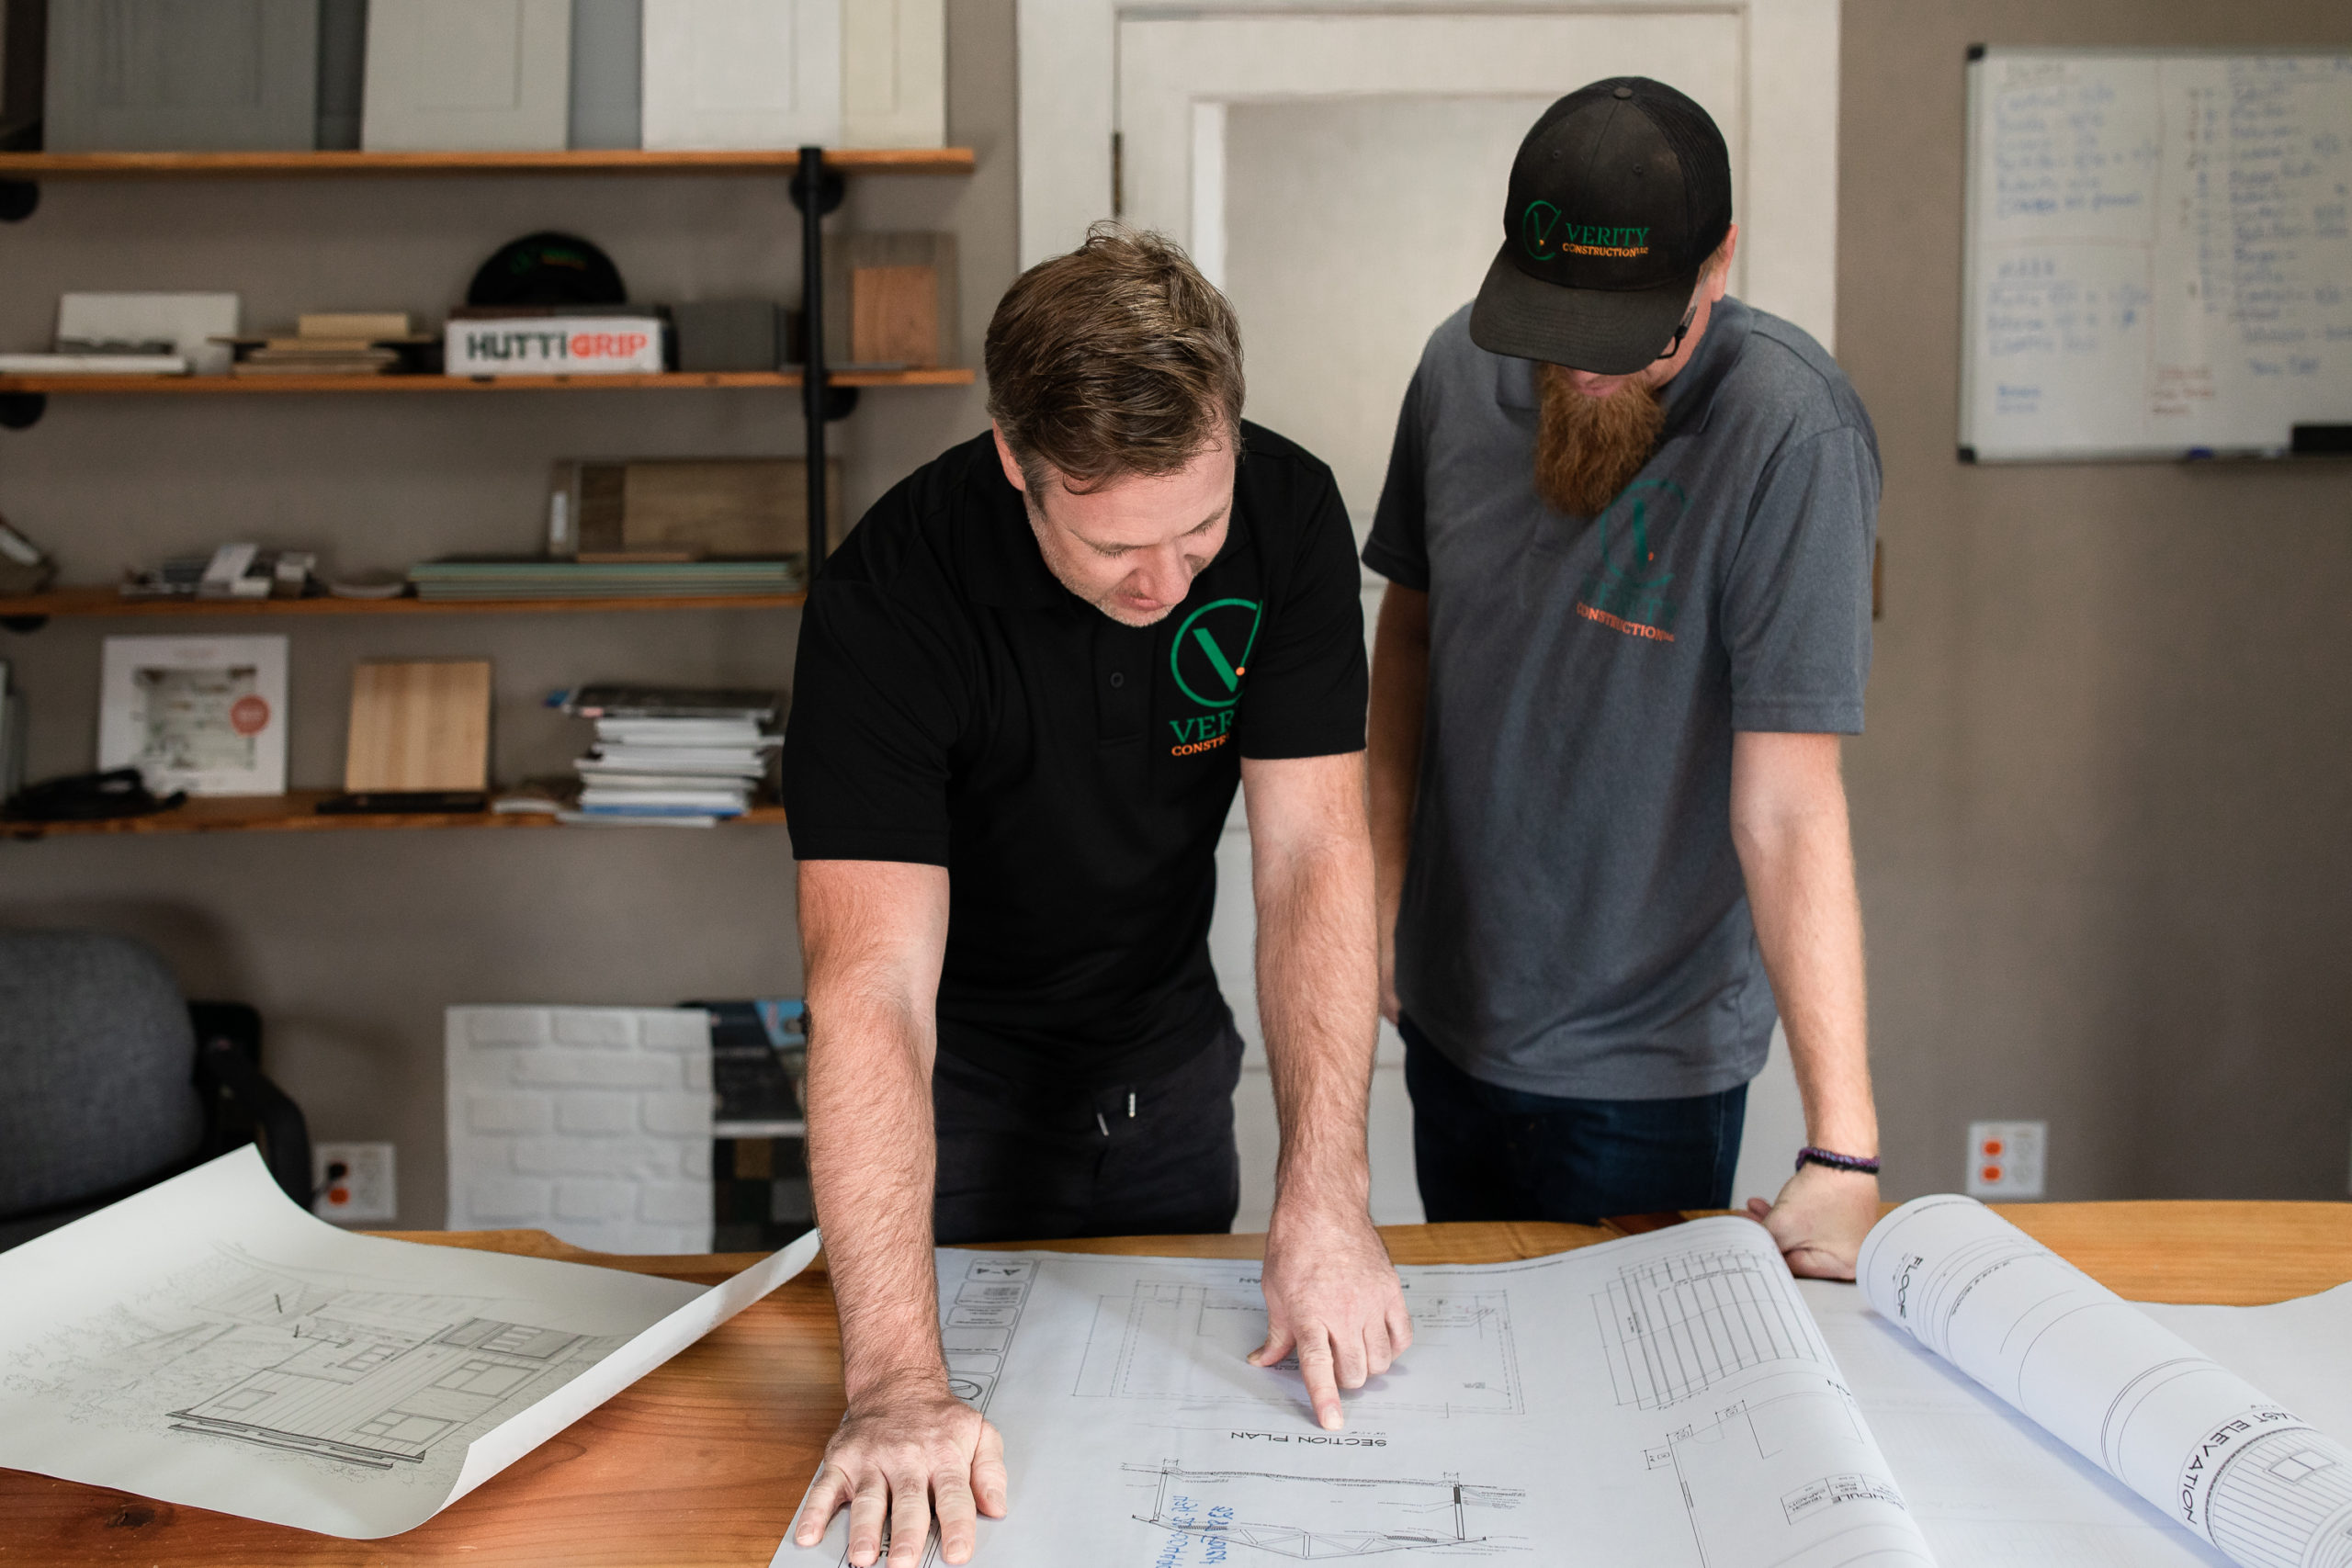 Licensed general contractors of Verity Construction assess blueprints for custom home build in Medford, OR